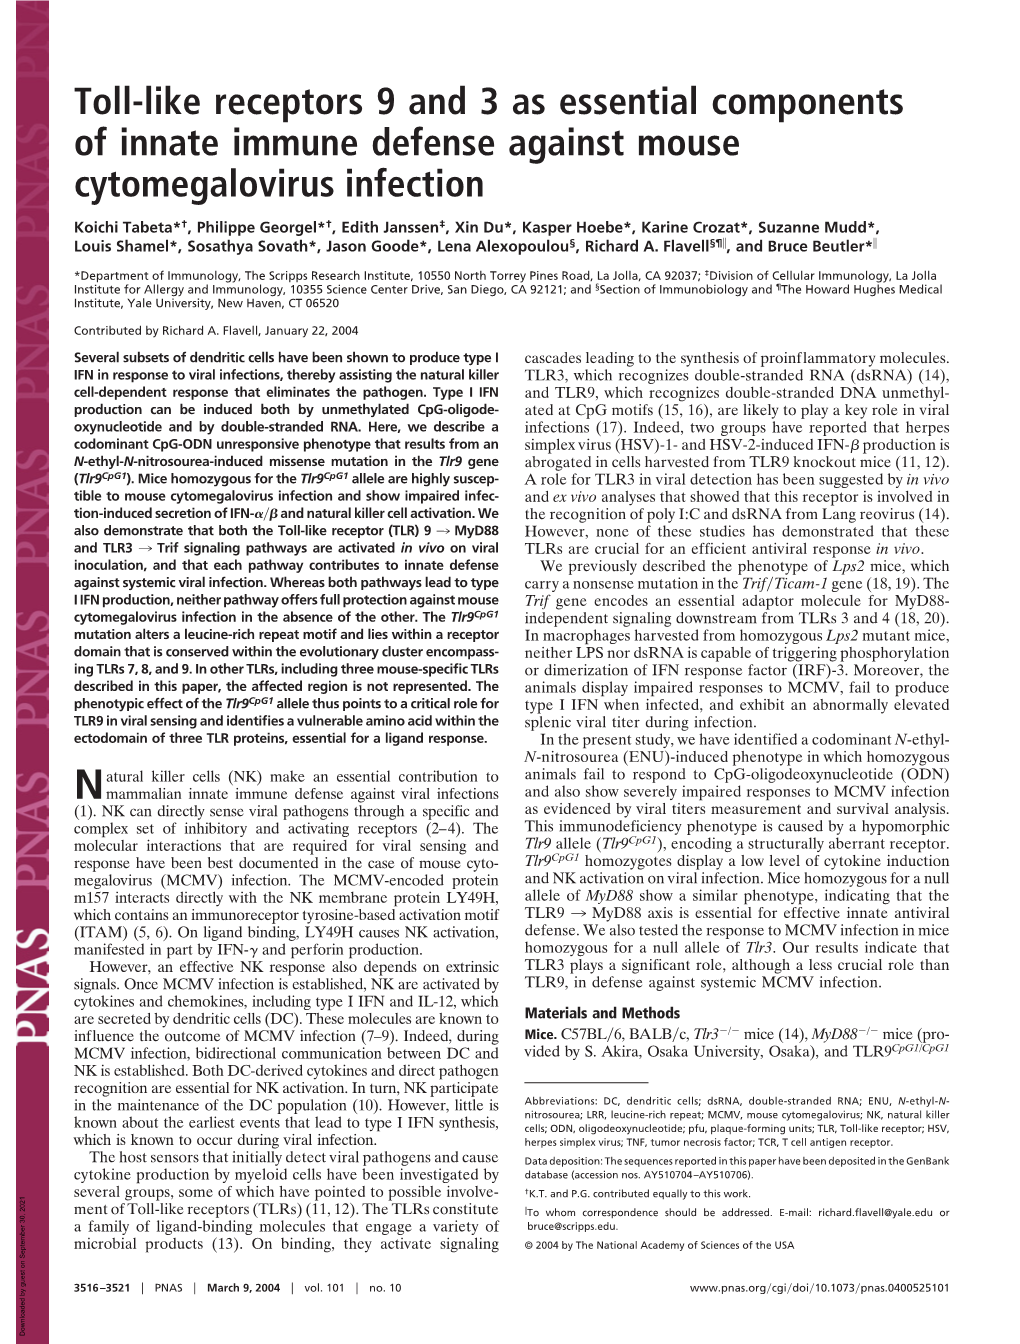 Toll-Like Receptors 9 and 3 As Essential Components of Innate Immune Defense Against Mouse Cytomegalovirus Infection